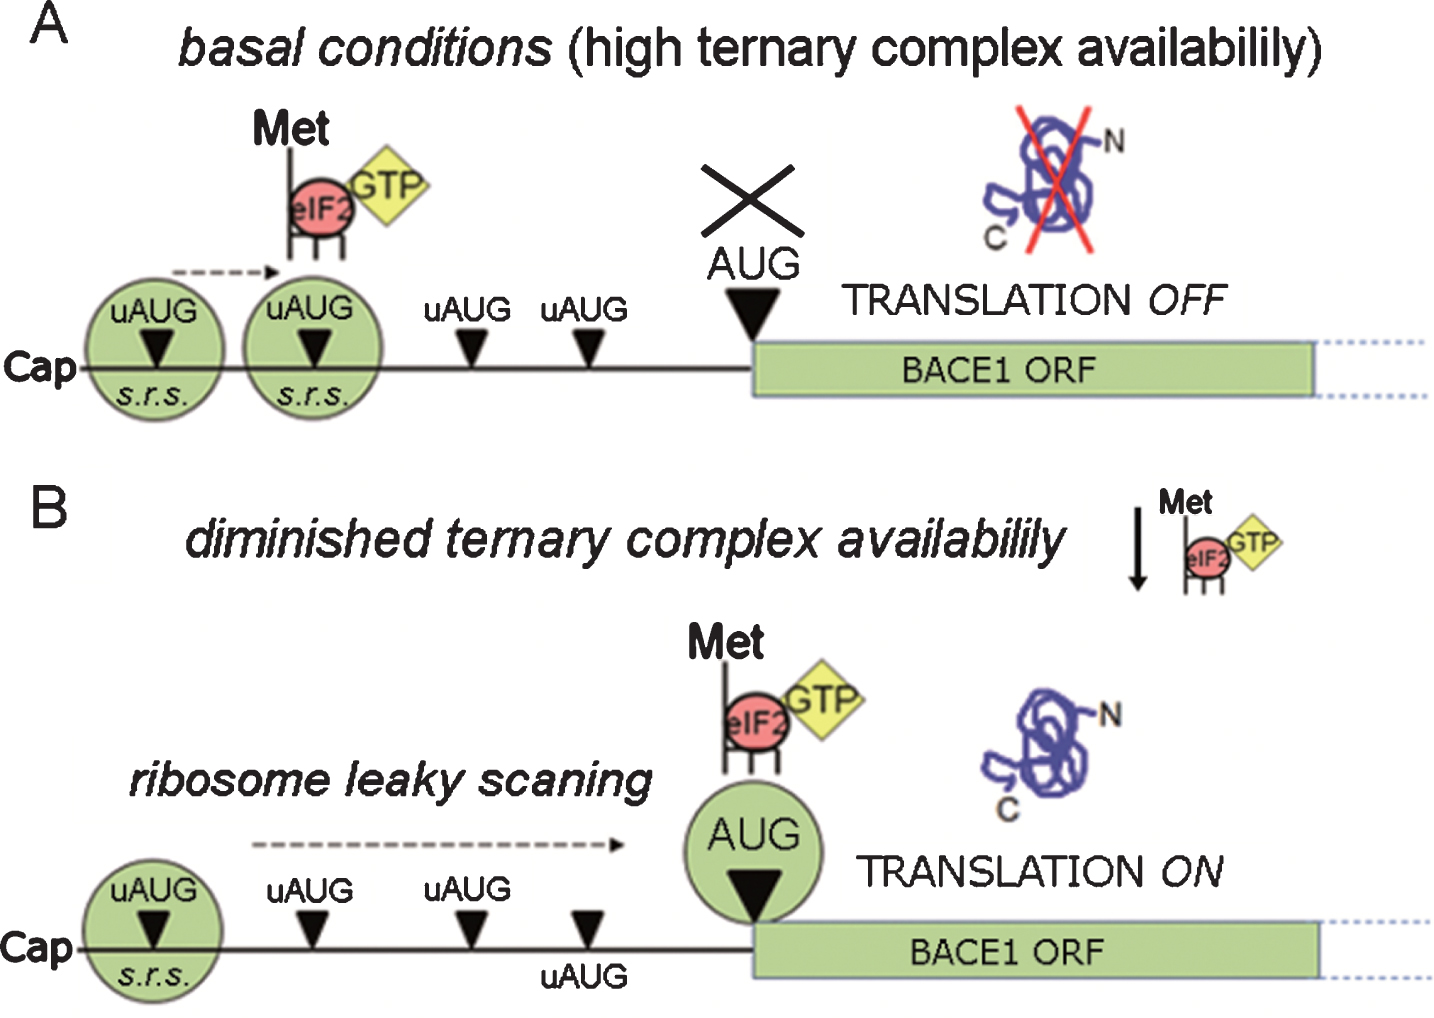 BACE1 translation facilitation. BACE1 translational repression can be by-passed by ribosomal leaky scanning & reinitiation, a condition requiring a lowering in ternary complex availability. As depicted in the diagram, when ternary complex availability is high (A, basal conditions) translation initiation can occur at high frequency at the uAUGs, preventing translation of BACE1 from its main ORF. Conversely, when the availability of ternary complexes diminishes (B) there is a drop in the formation of active ribosomal complexes, leading to a decreased recognition of upstream AUGs (ribosome leaky scanning) and to a and more frequent recognition of the main ORF allowing BACE1 protein synthesis to start. s.r.s., small ribosomal subunit.